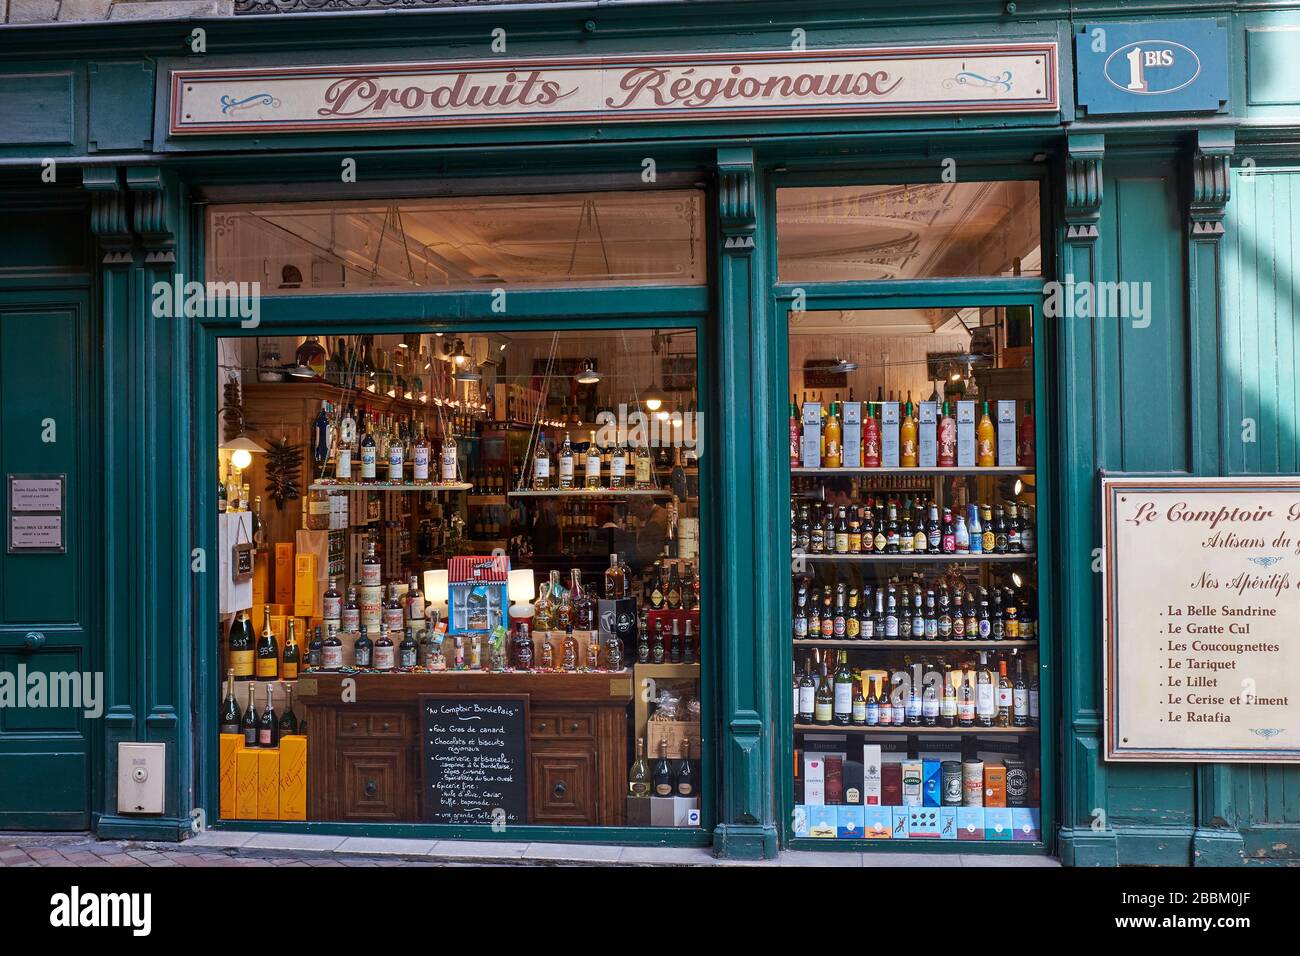 Exterior view of french wine and spirits shop called Produits Régionaux Stock Photo